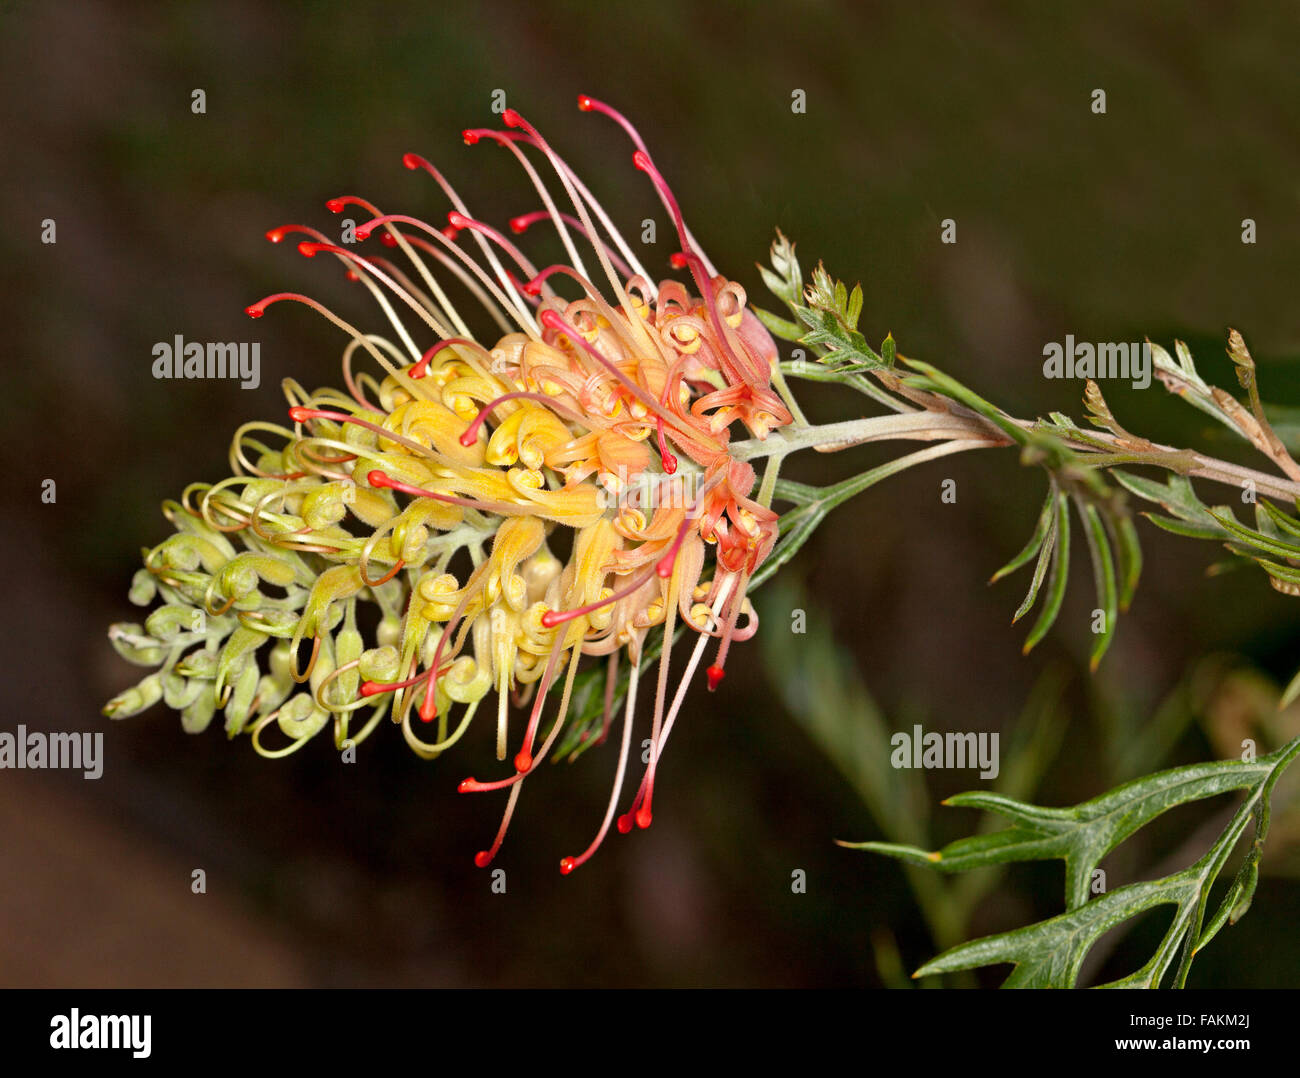 Stunning cream and pink flower with vivid red stamens and green leaves of Australian native plant Grevillea Loopy Lou on dark background Stock Photo